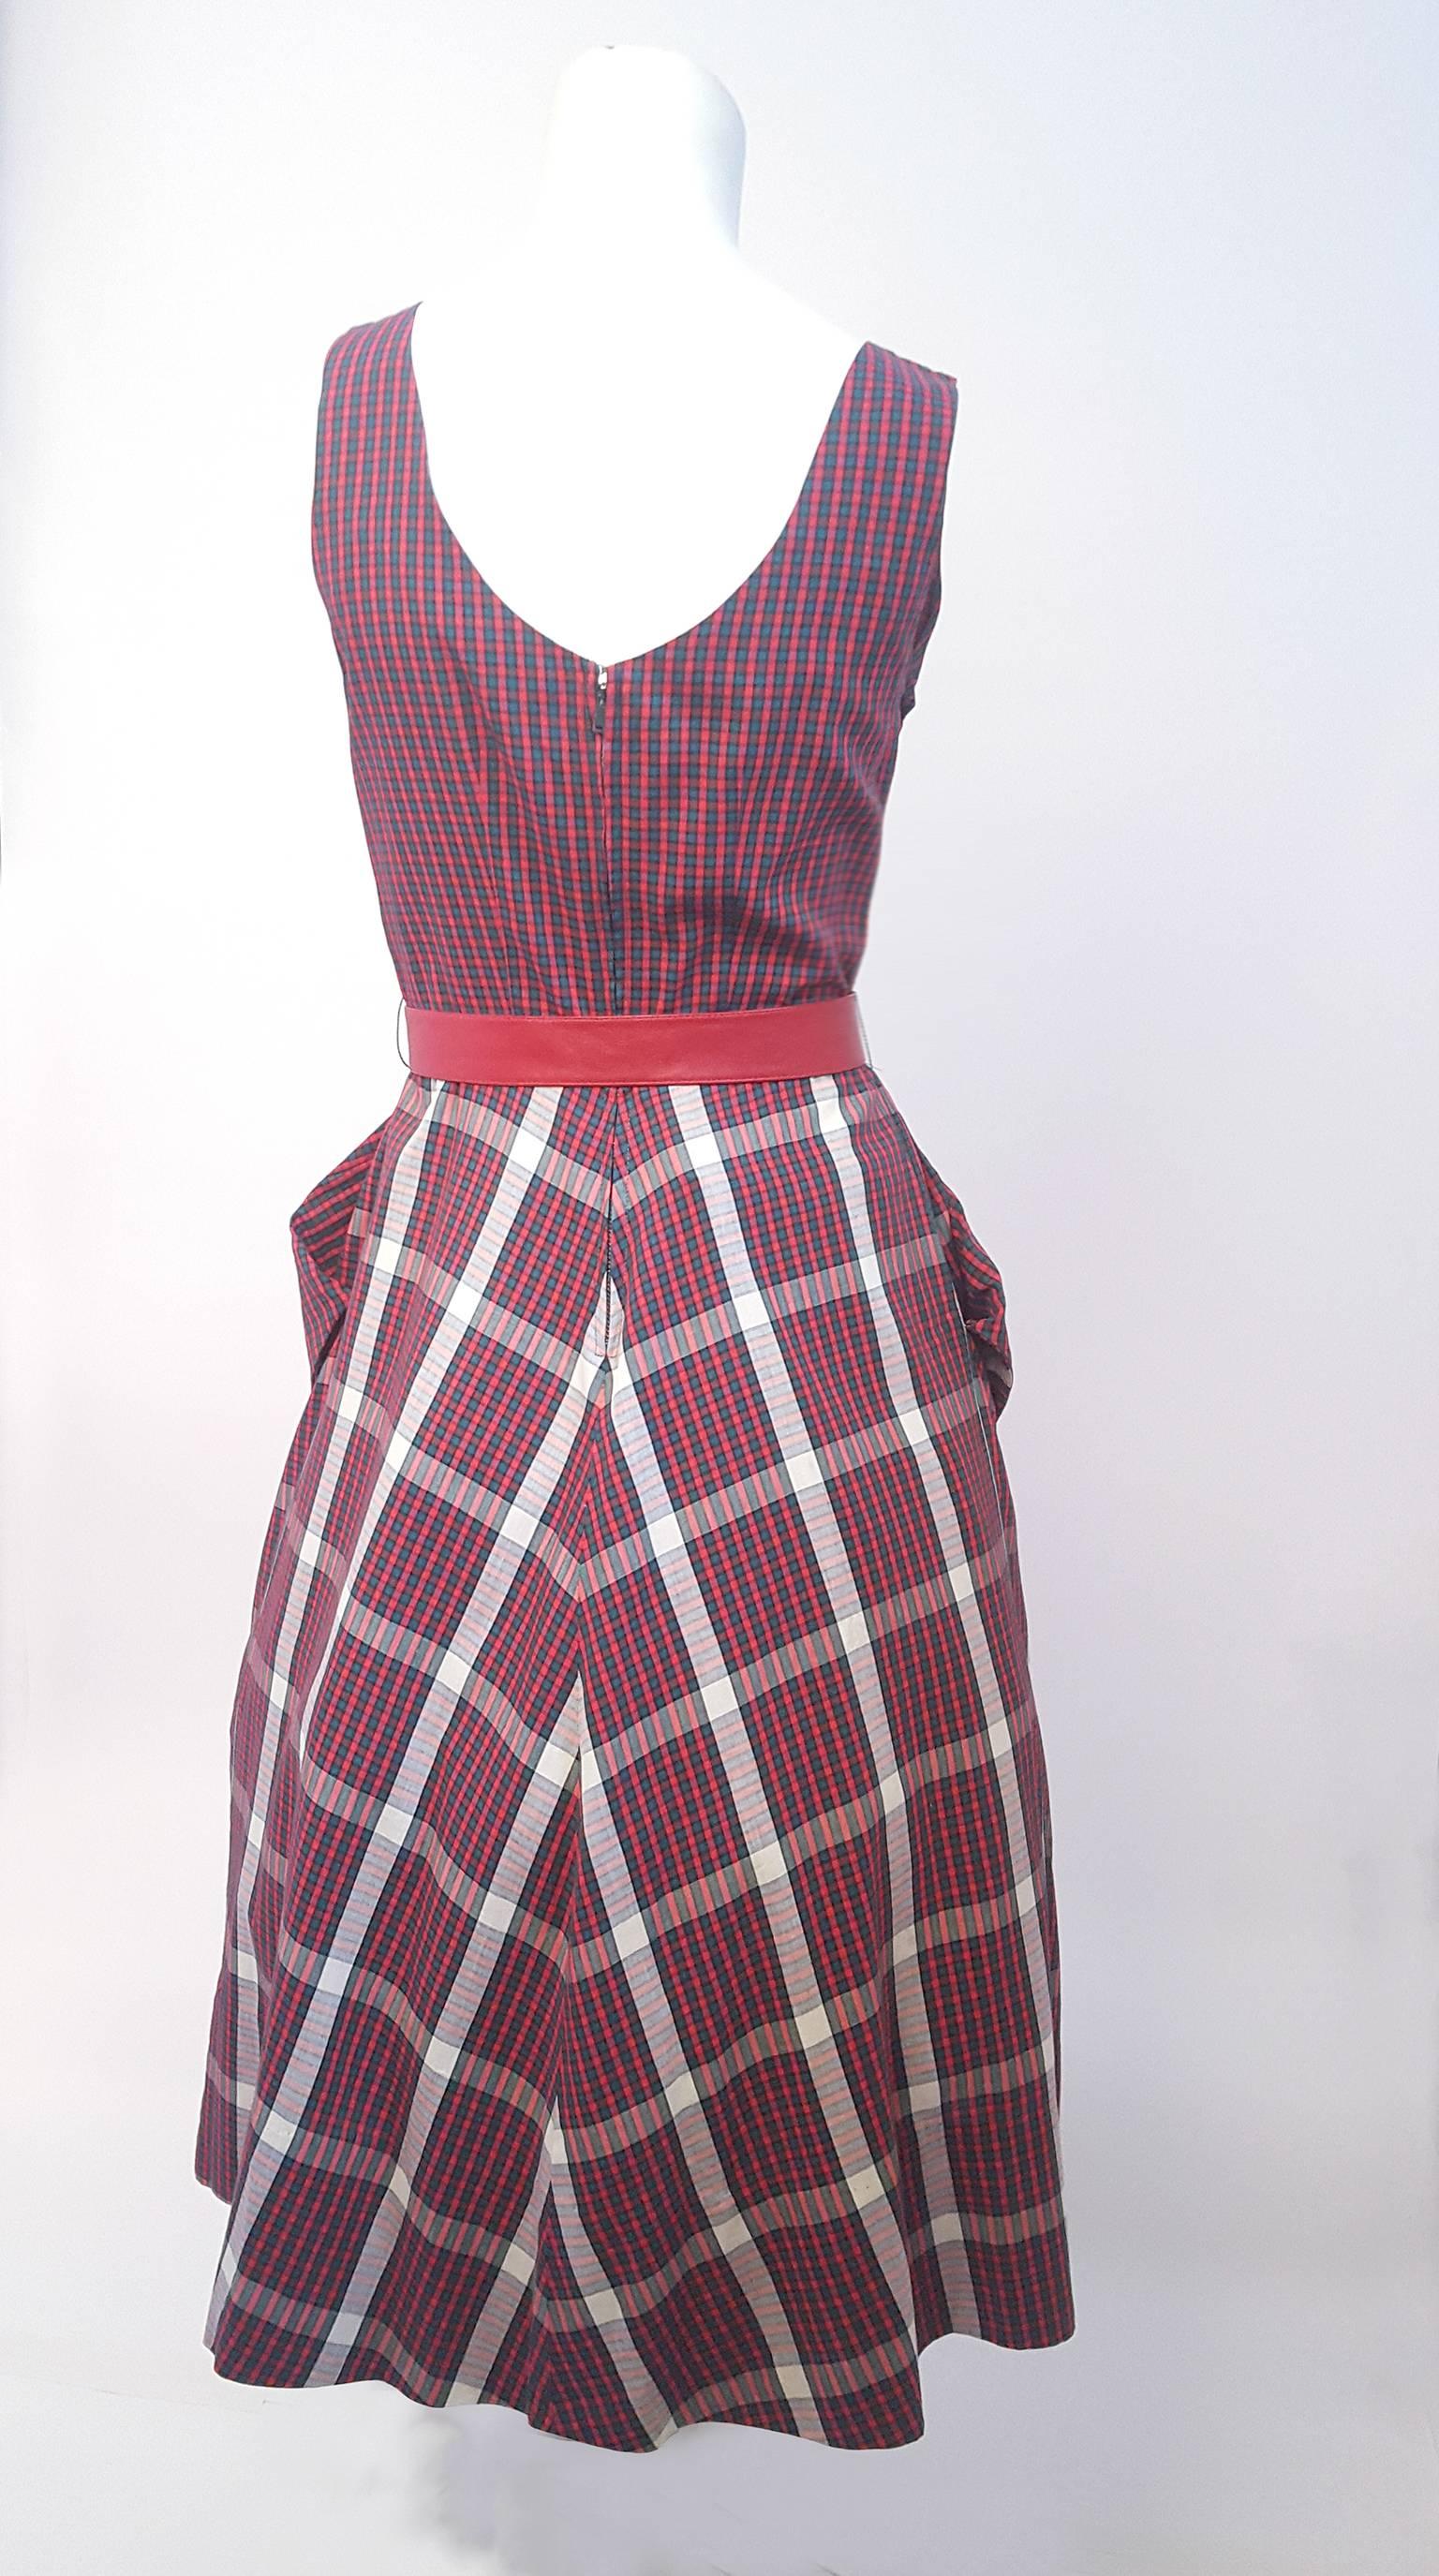 50s Red and Green Tartan Day Dress. Side pockets. Comes with belt a complementary 1950s red belt to accent the waist silhouette. Back zip closure. Shown over petticoat in photos.